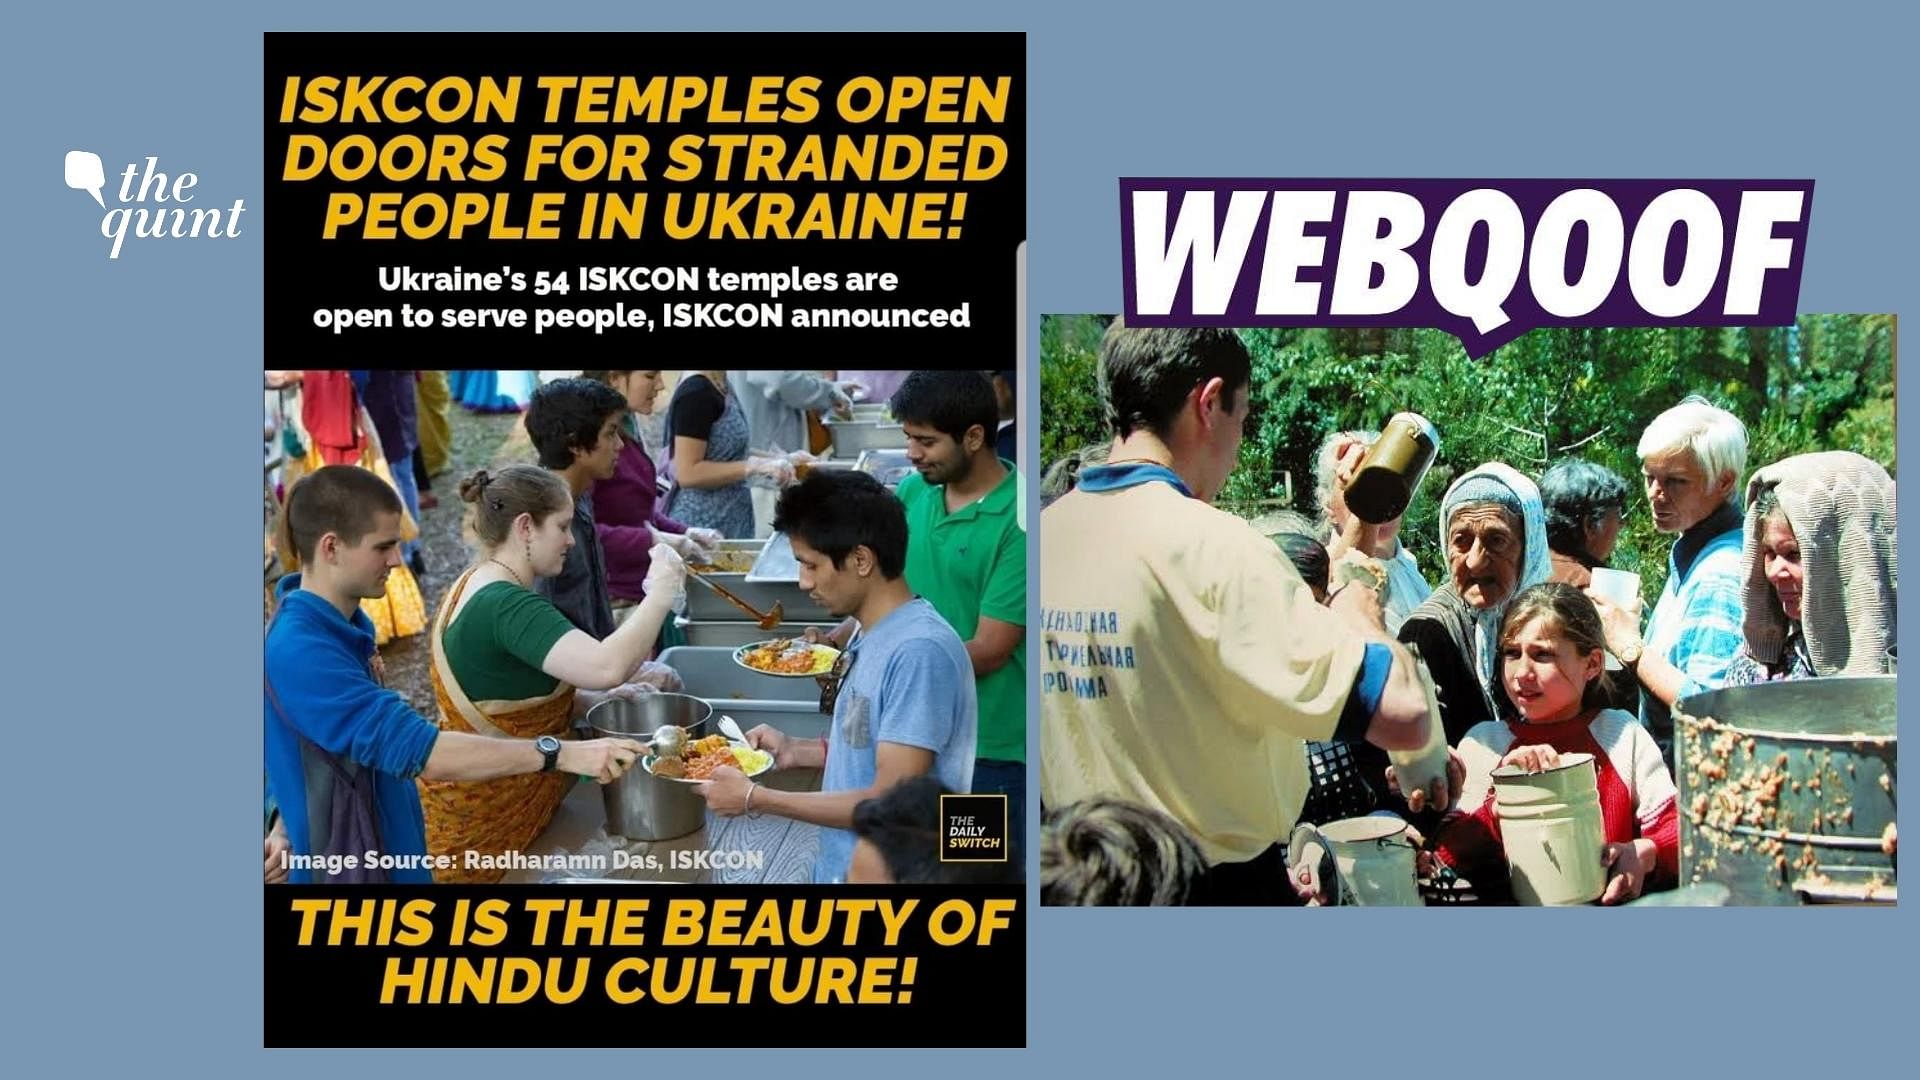 <div class="paragraphs"><p>The claim states that the images show ISKCON temples distributing food in Ukraine.</p></div>